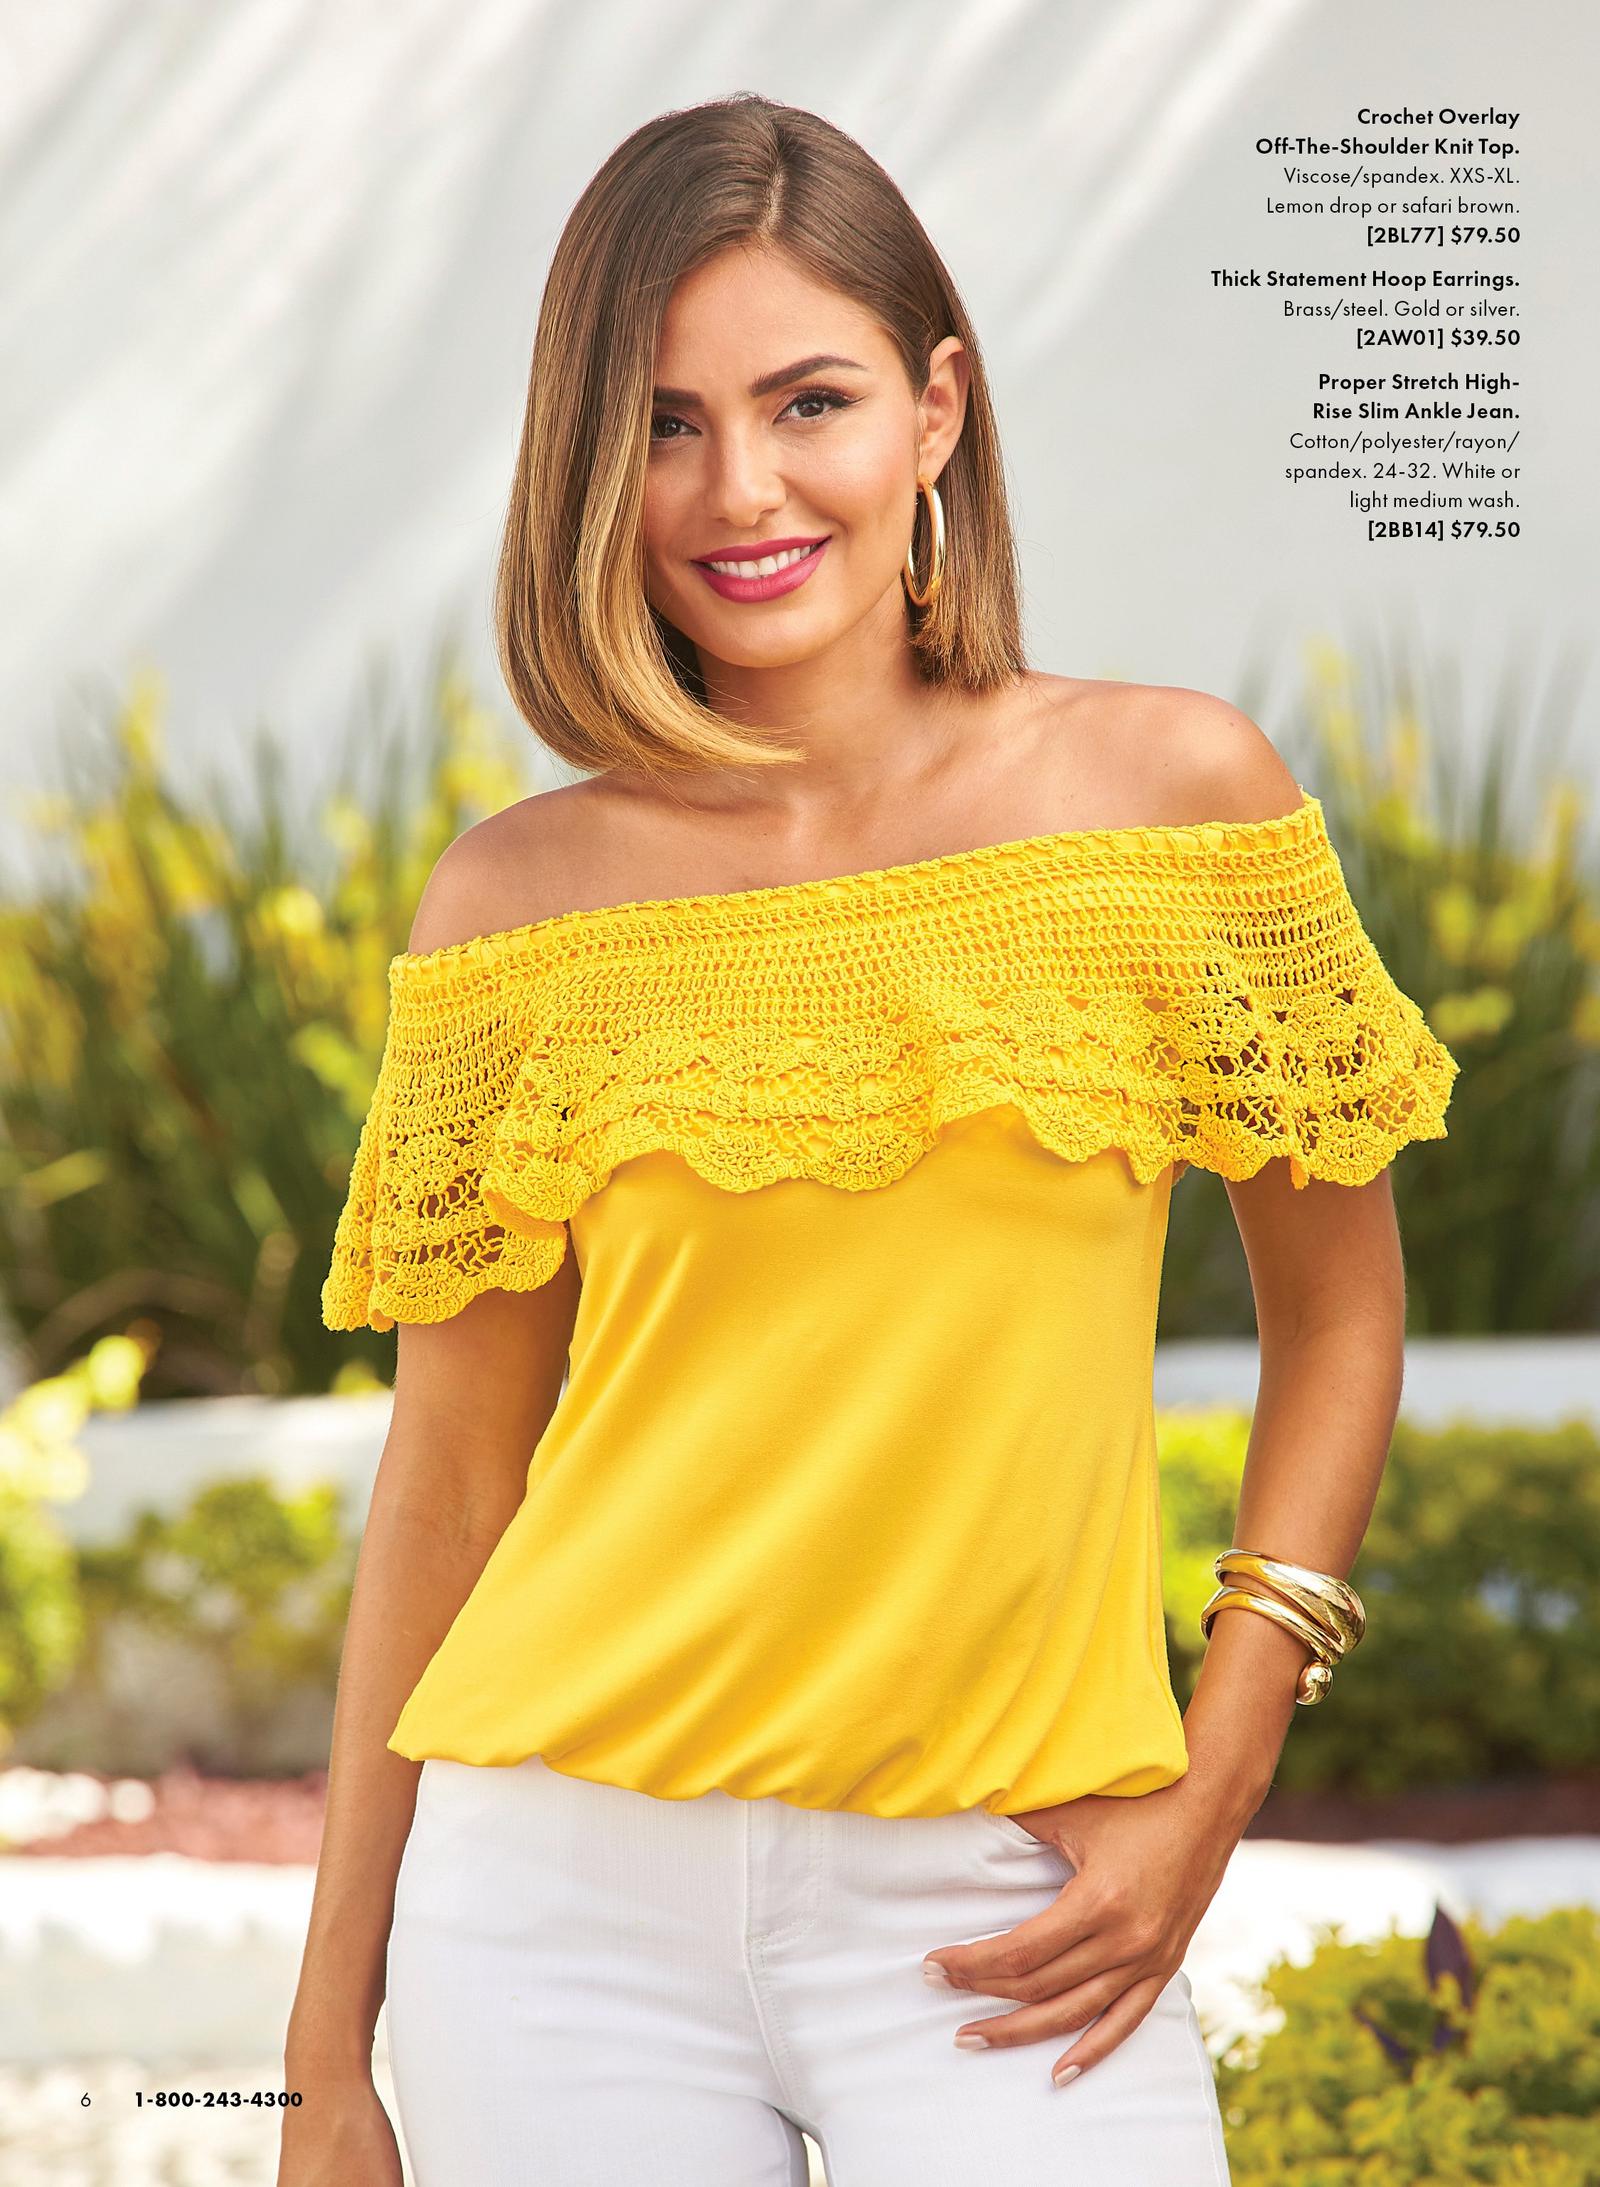 model wearing a yellow crochet overlay off-the-shoulder top, gold hoop earrings, and white jeans.